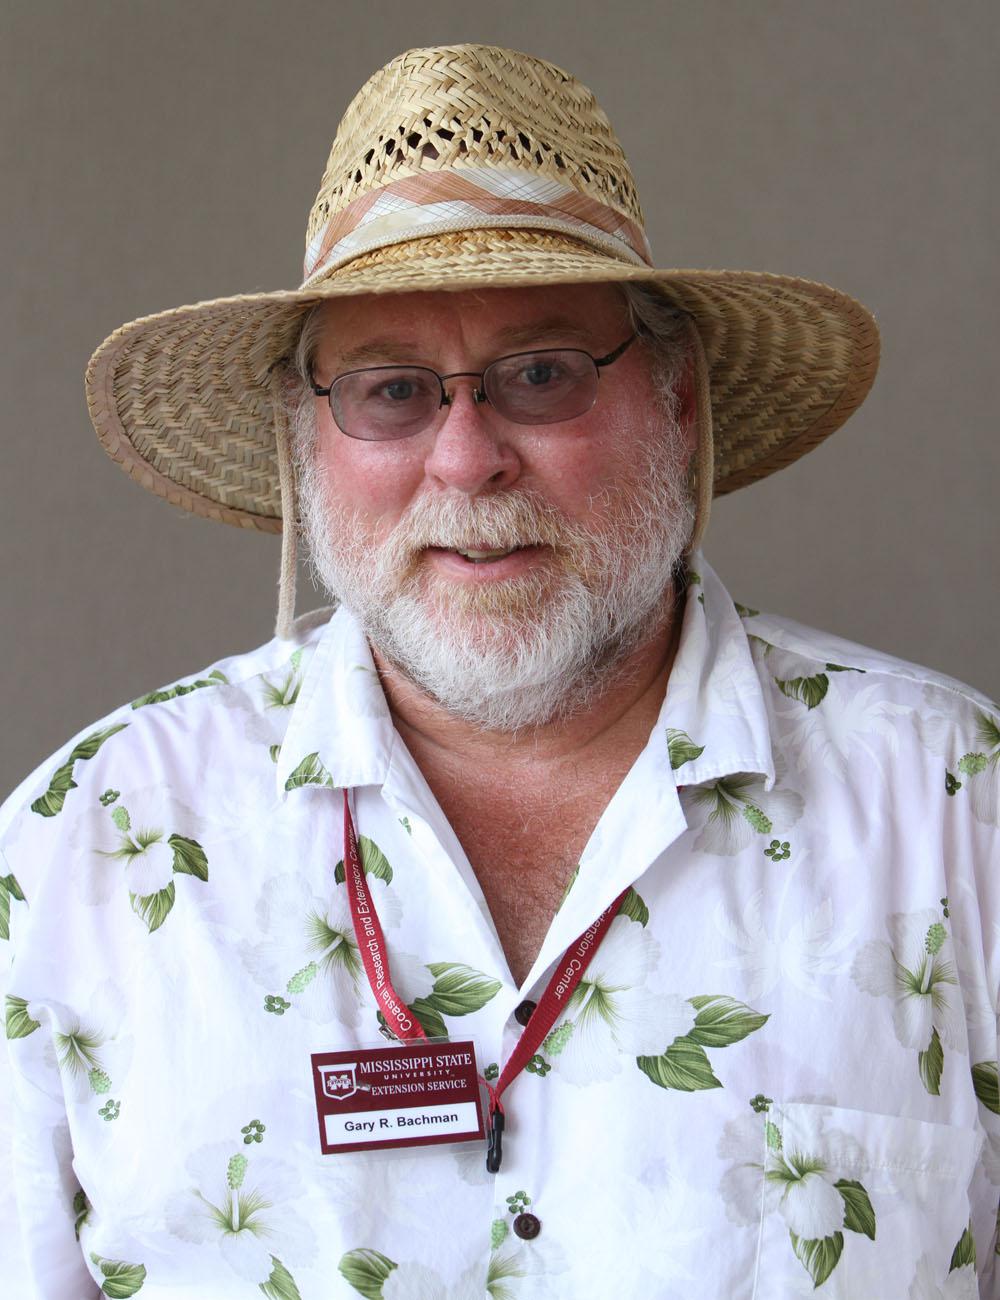 Gary Bachman is the host of "Southern Gardening," the television program, radio segment and newspaper column produced by the Mississippi State University Extension Service. (Photo by Kat Lawrence)